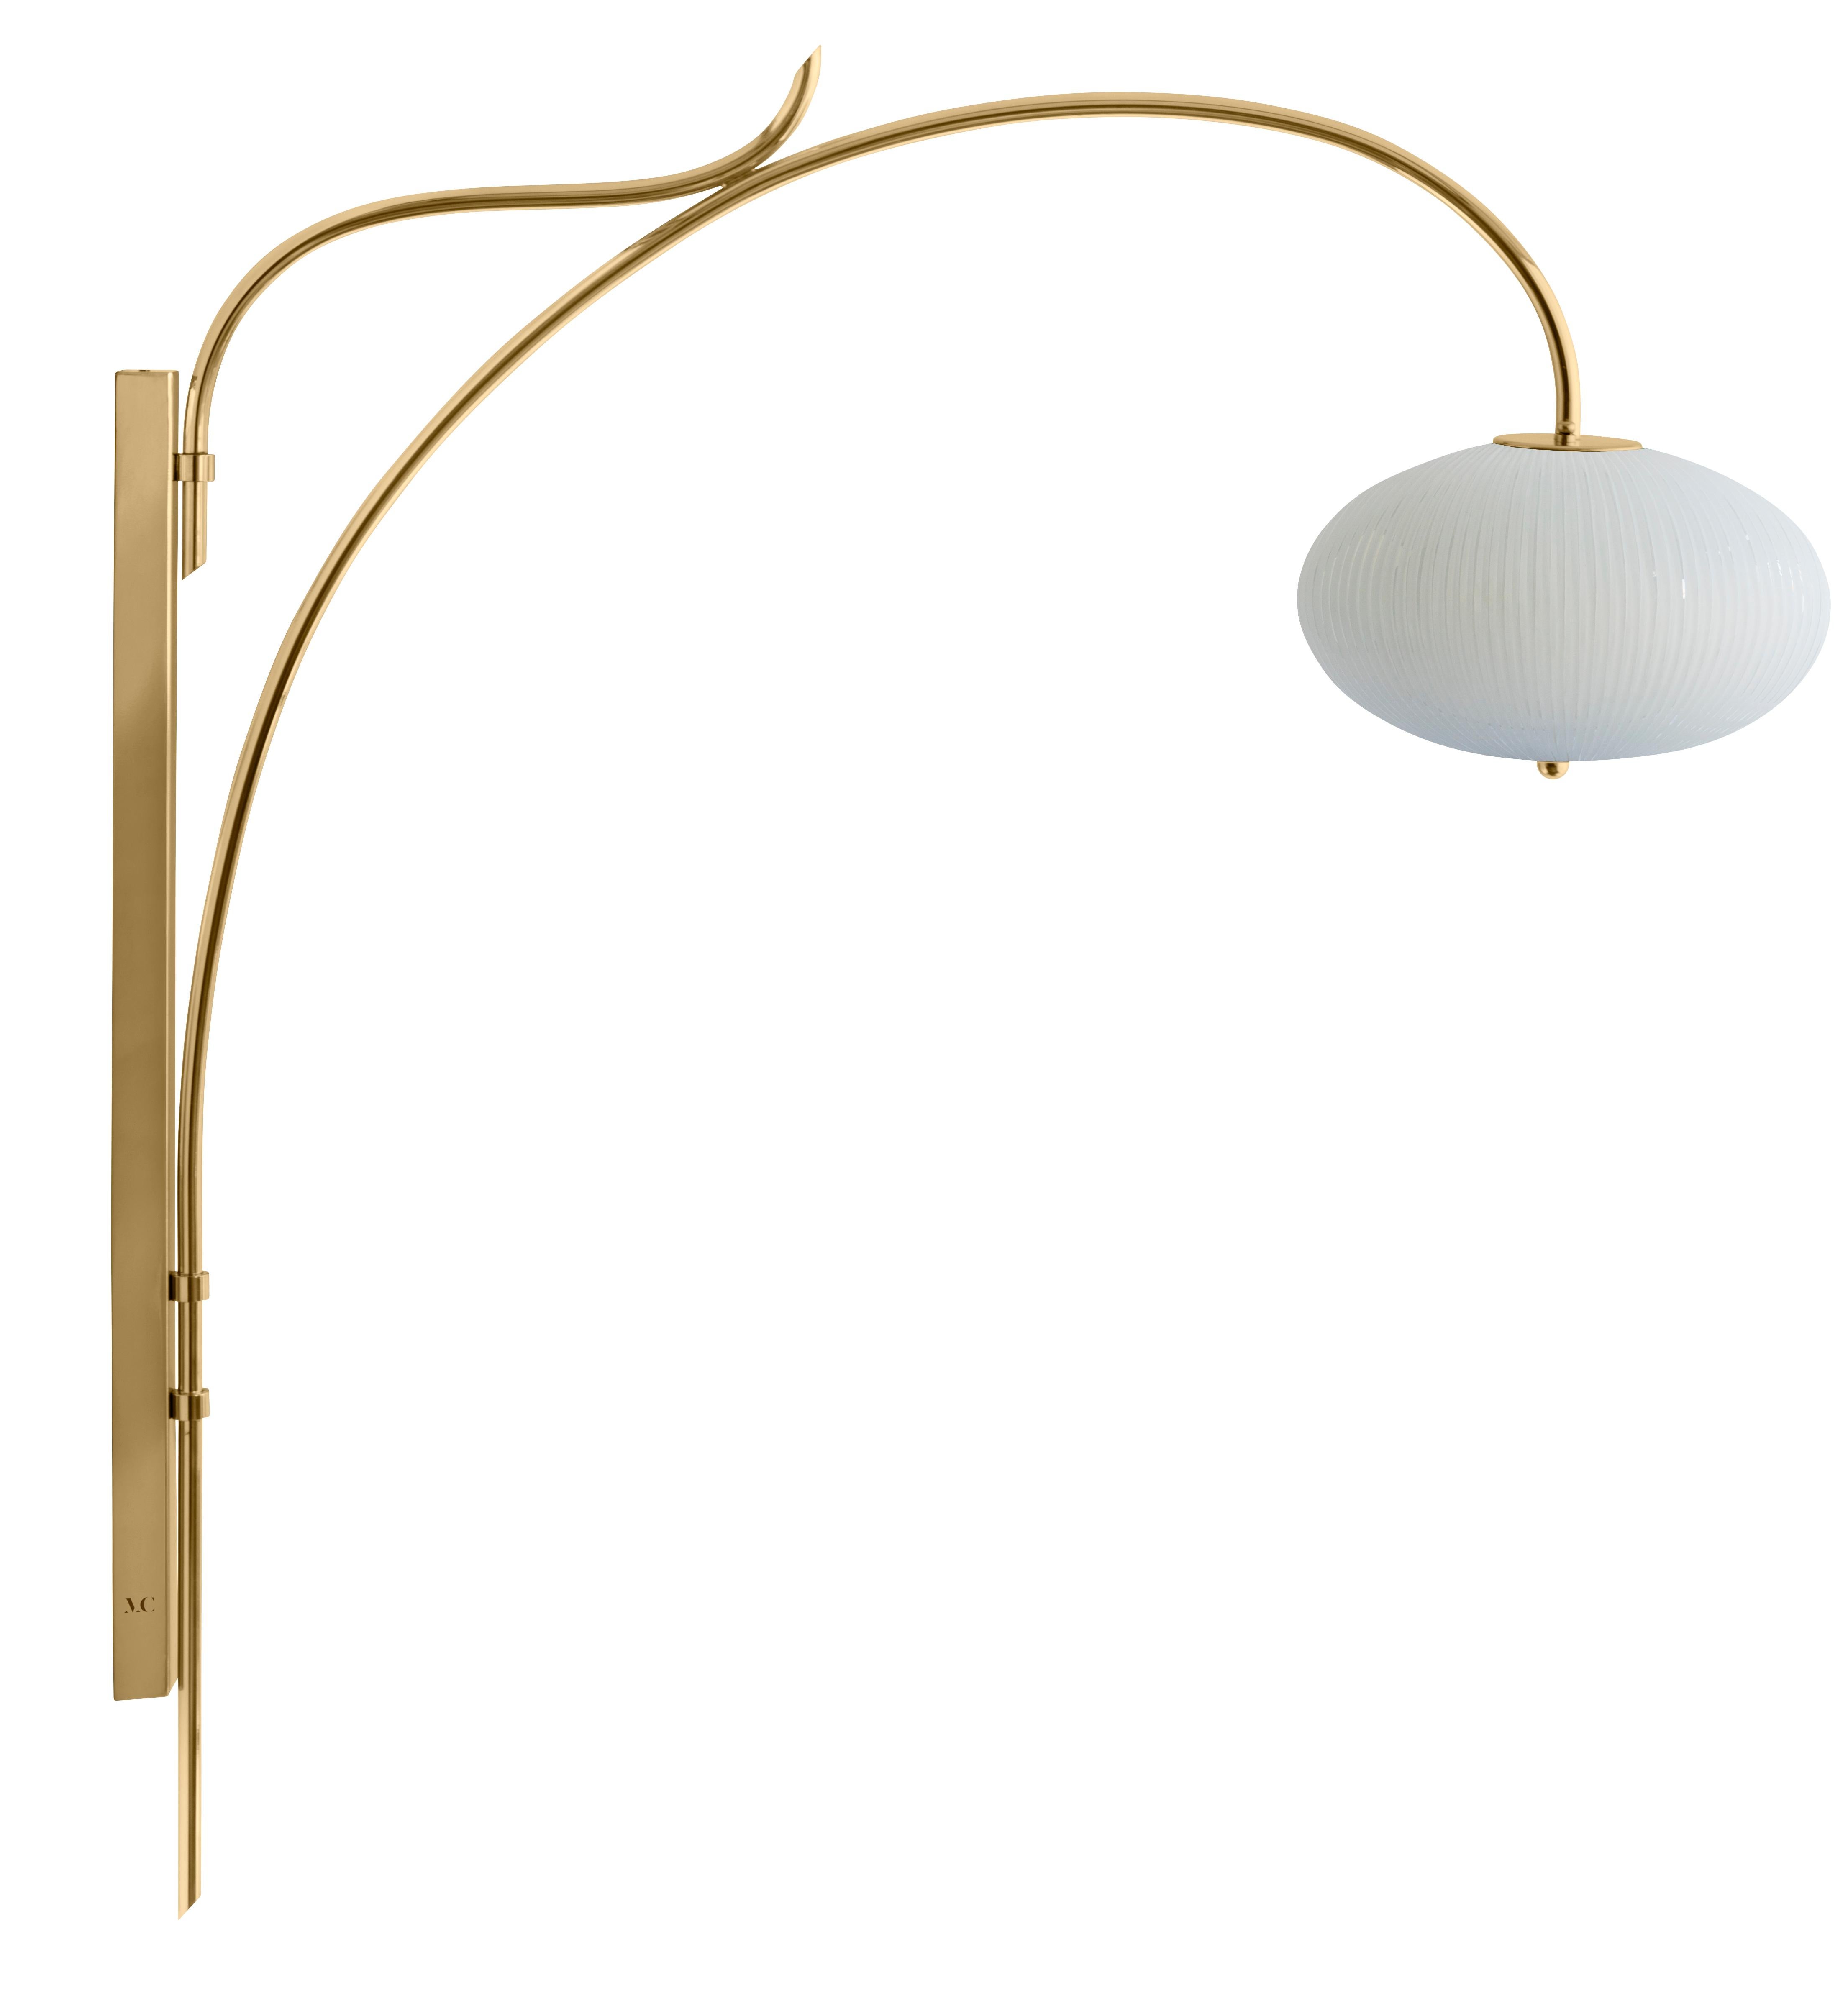 Wall lamp china 07 by Magic Circus Editions
Dimensions: H 120 x W 32 x D 113.5 cm
Materials: Brass, mouth blown glass sculpted with a diamond saw
Colour: Rich grey

Available finishes: Brass, nickel
Available colours: enamel soft white, soft